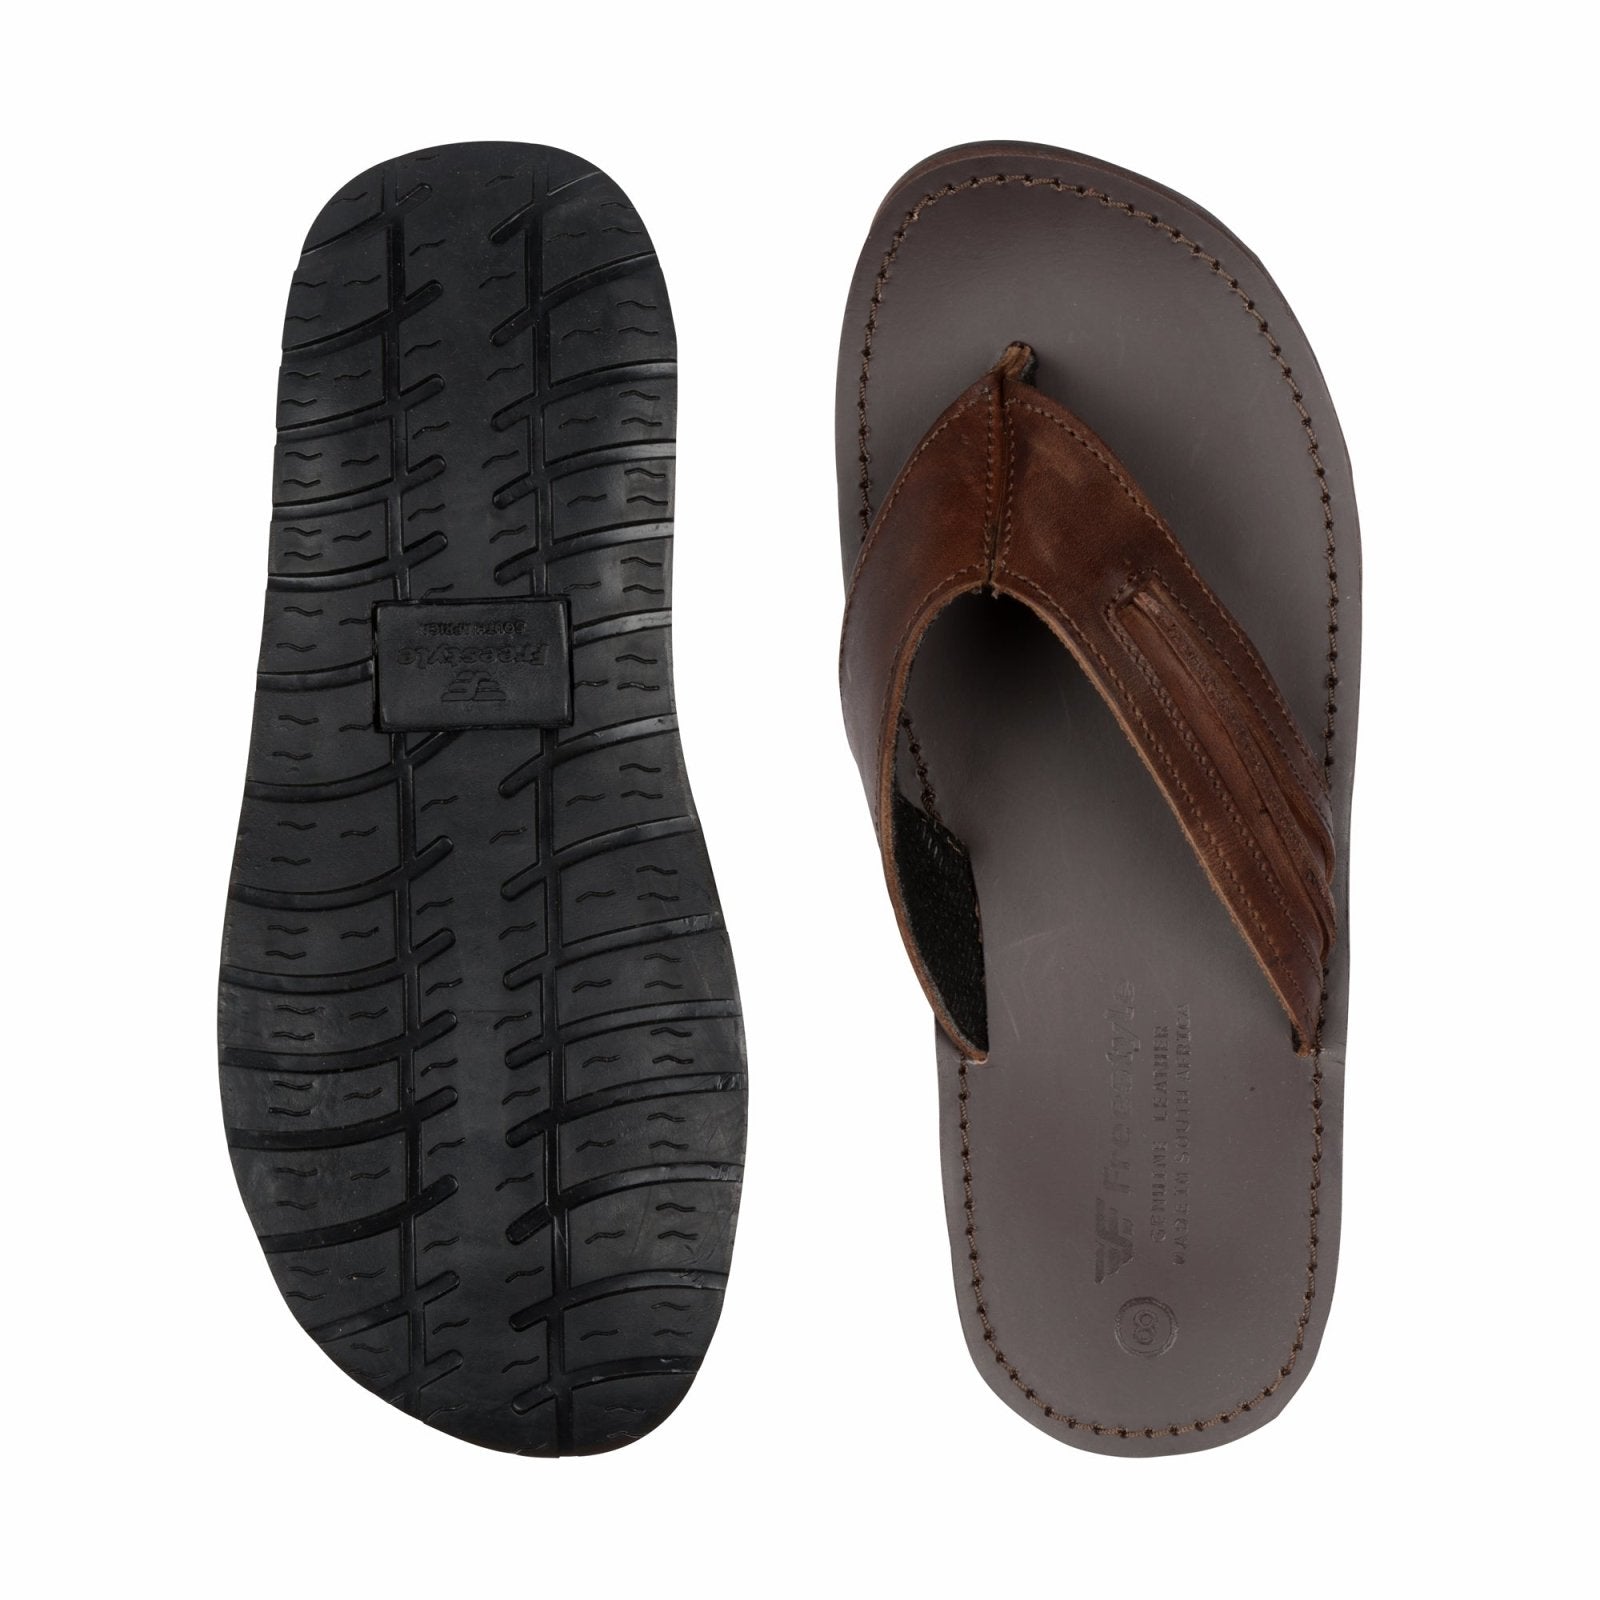 Surfthong Men's premium leather plakkie - Freestyle SA Proudly local leather boots veldskoens vellies leather shoes suede veldskoens